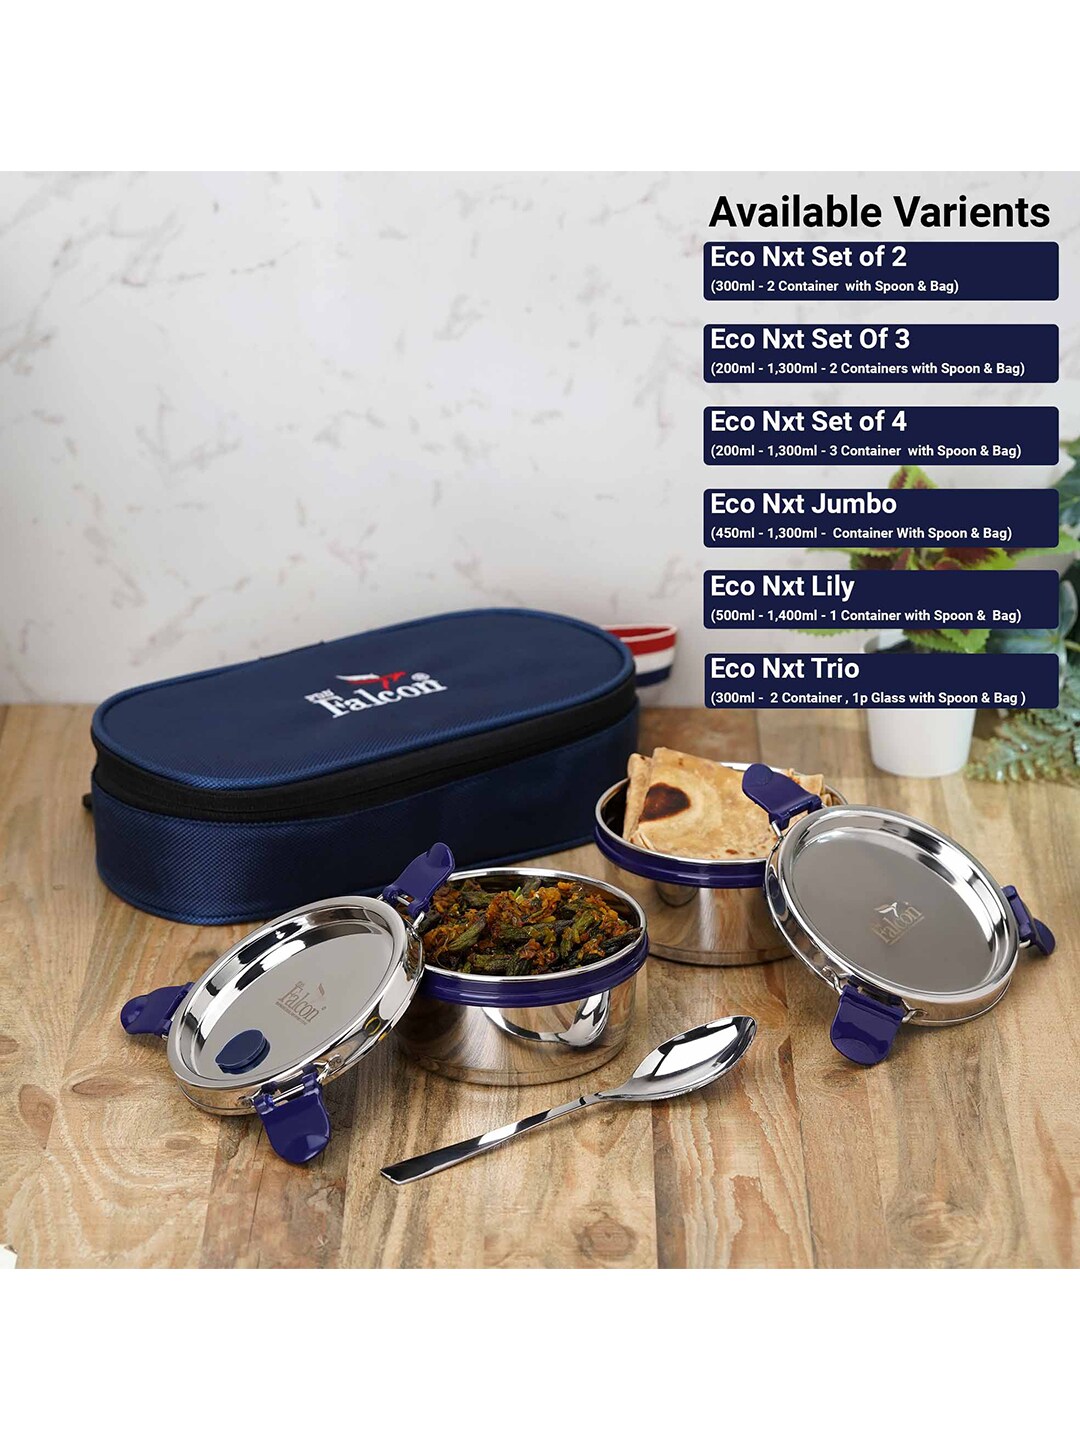 PDDFALCON Blue & Stainless Steel Insulated Lunch Box 100% leak-proof & airtight Set of 2 Price in India